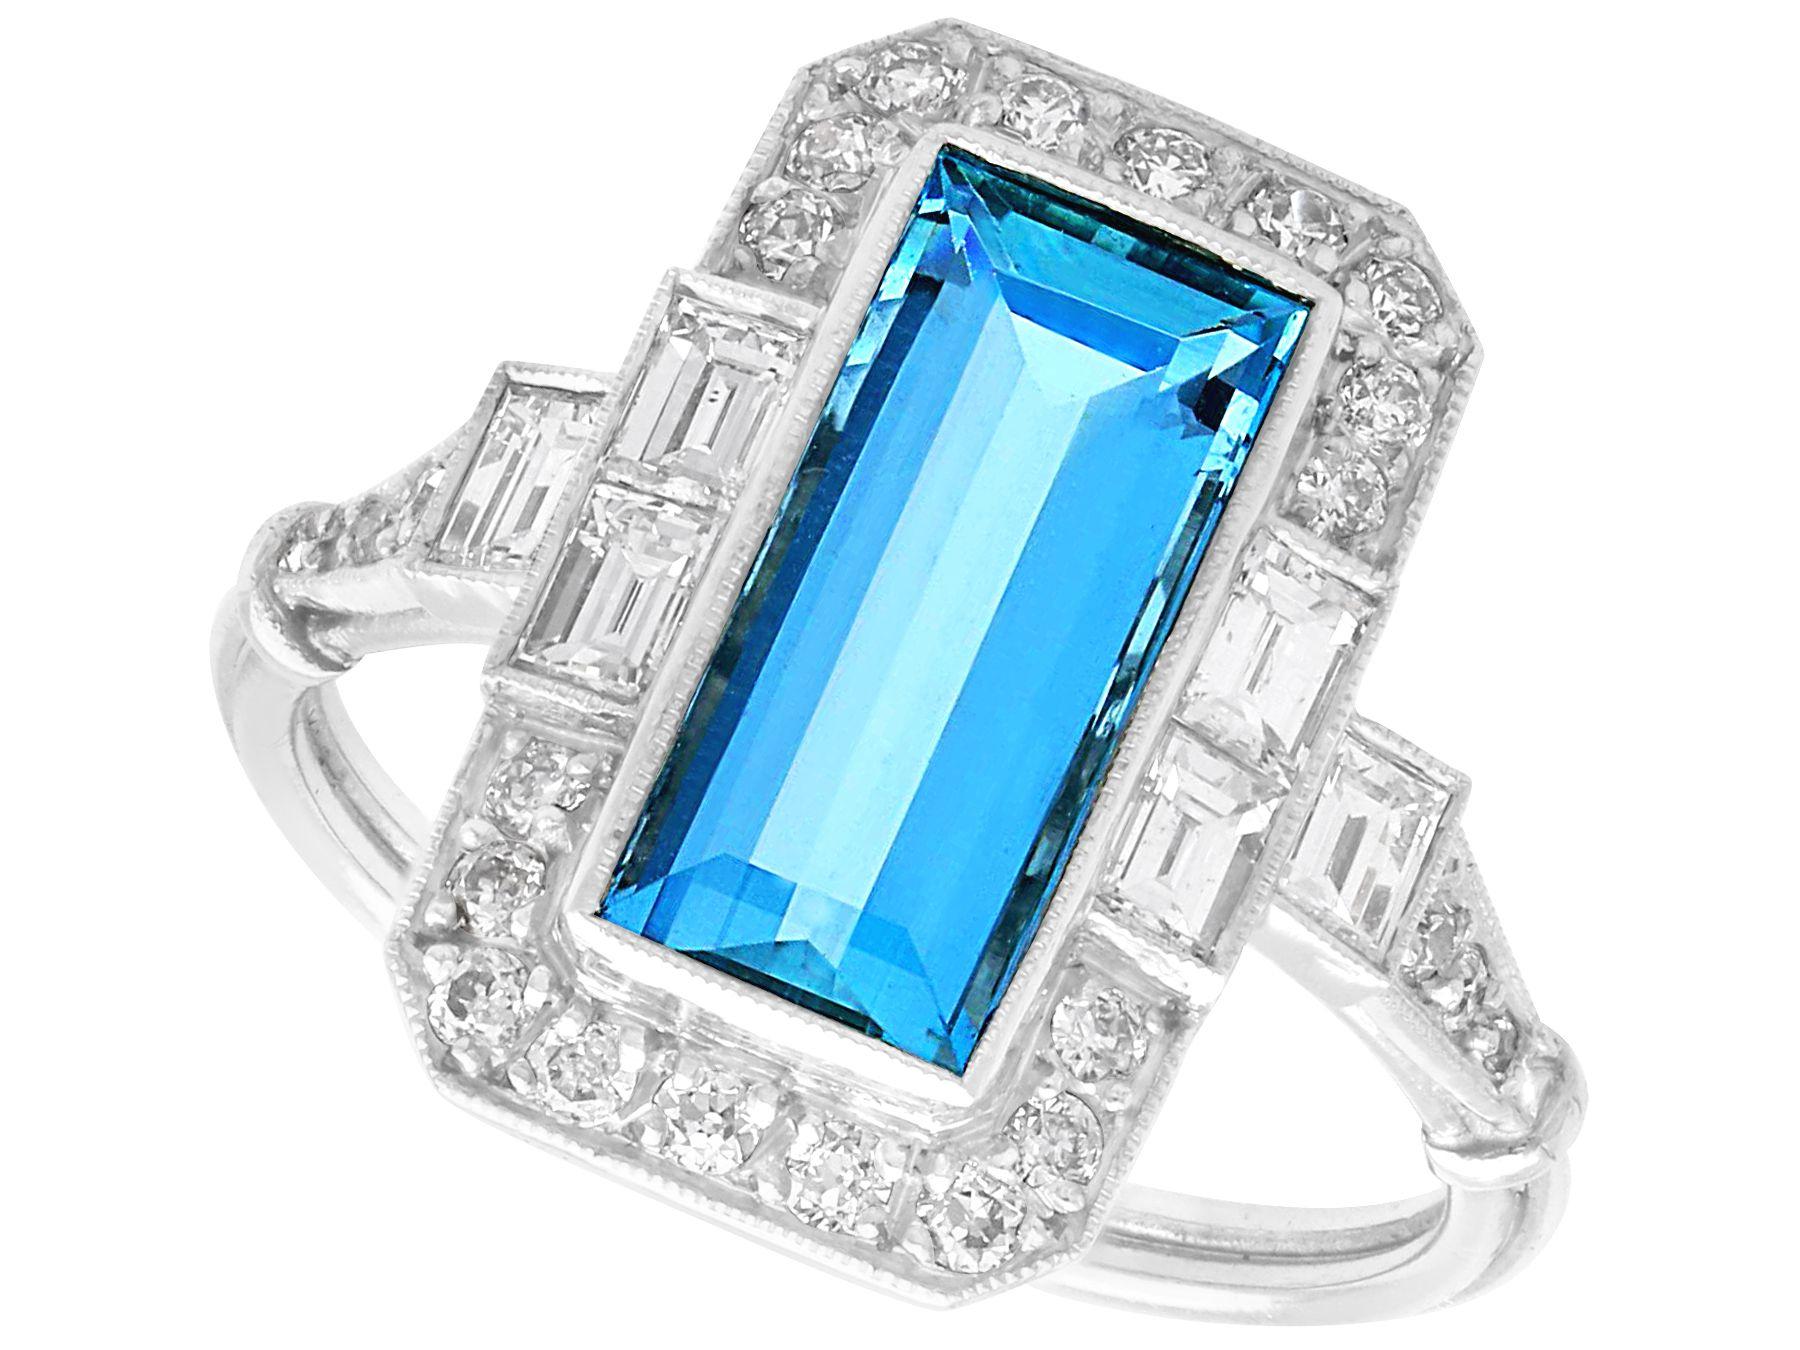 A stunning, fine and impressive 1.97 carat aquamarine, 0.94 carat diamond and platinum dress ring; part of our diverse gemstone jewelry and estate jewelry collections. 

This stunning, fine and impressive aquamarine ring has been crafted in